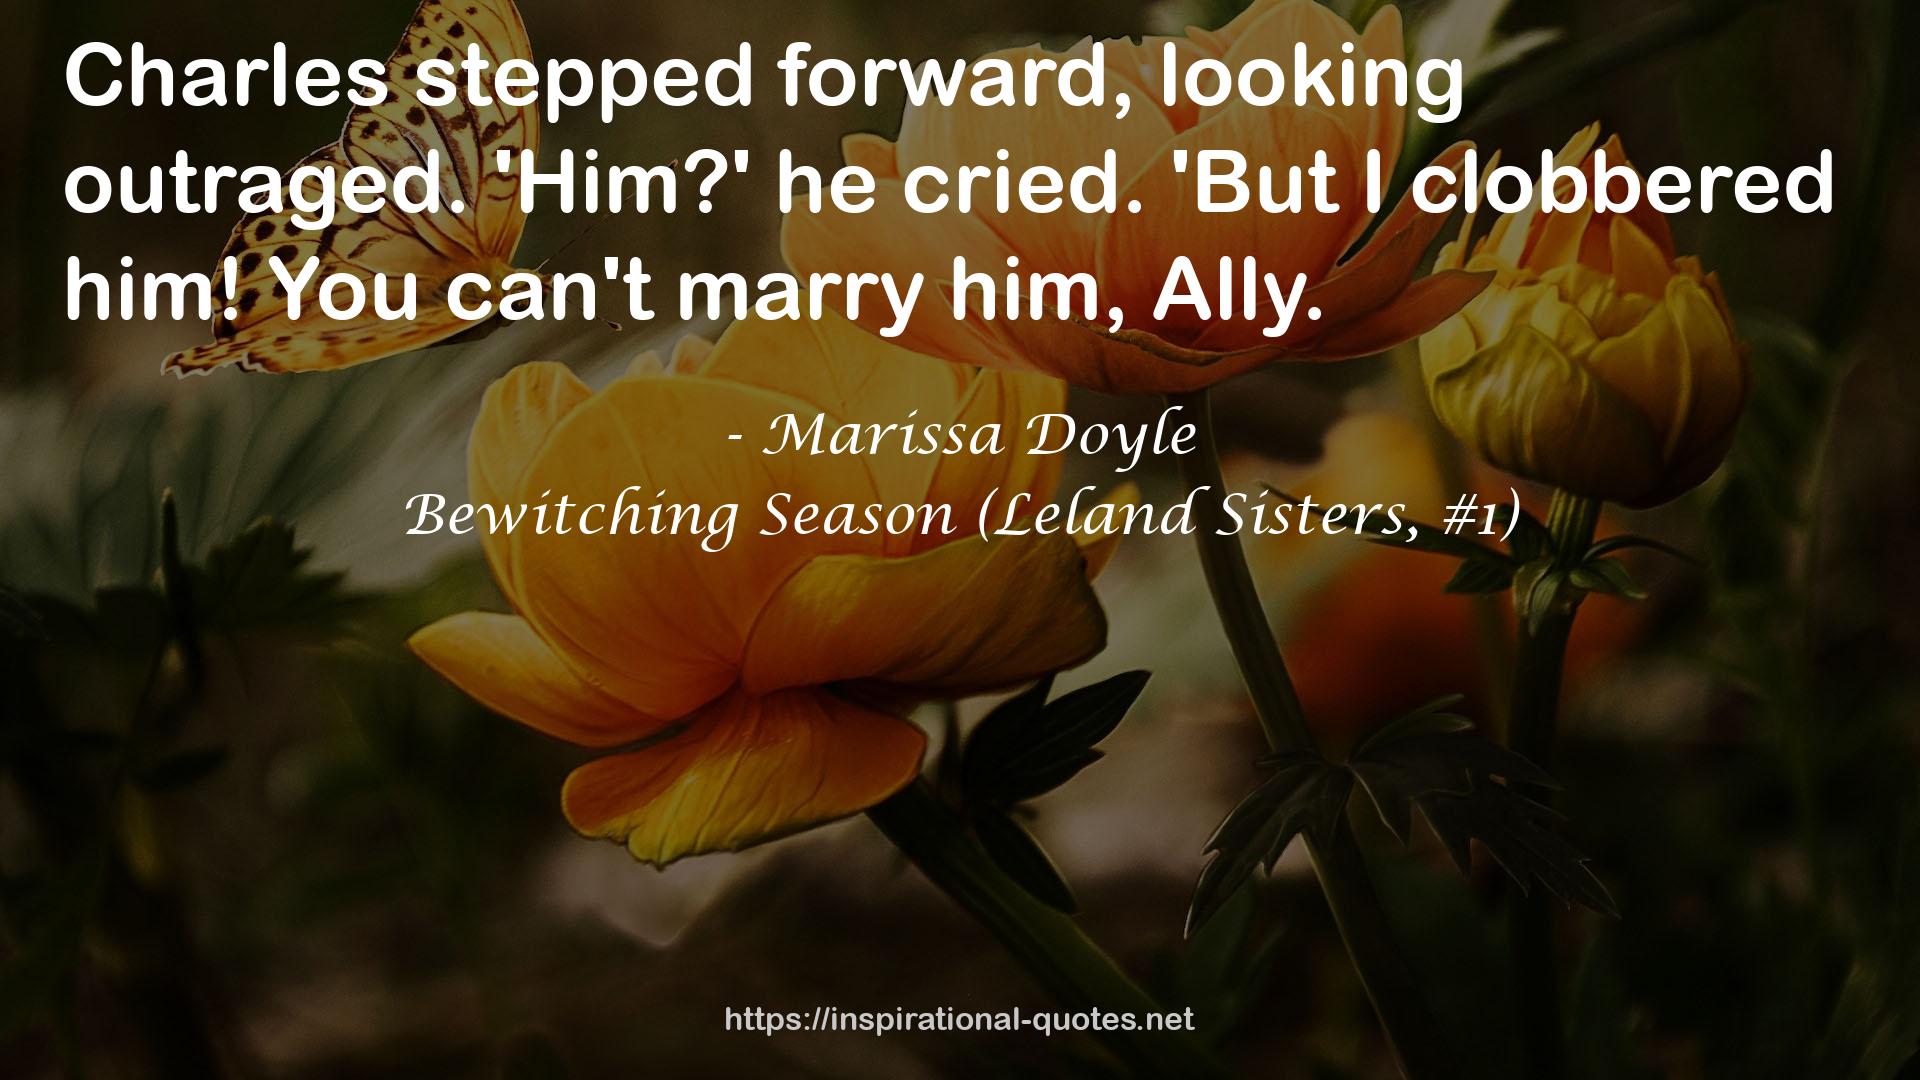 Bewitching Season (Leland Sisters, #1) QUOTES